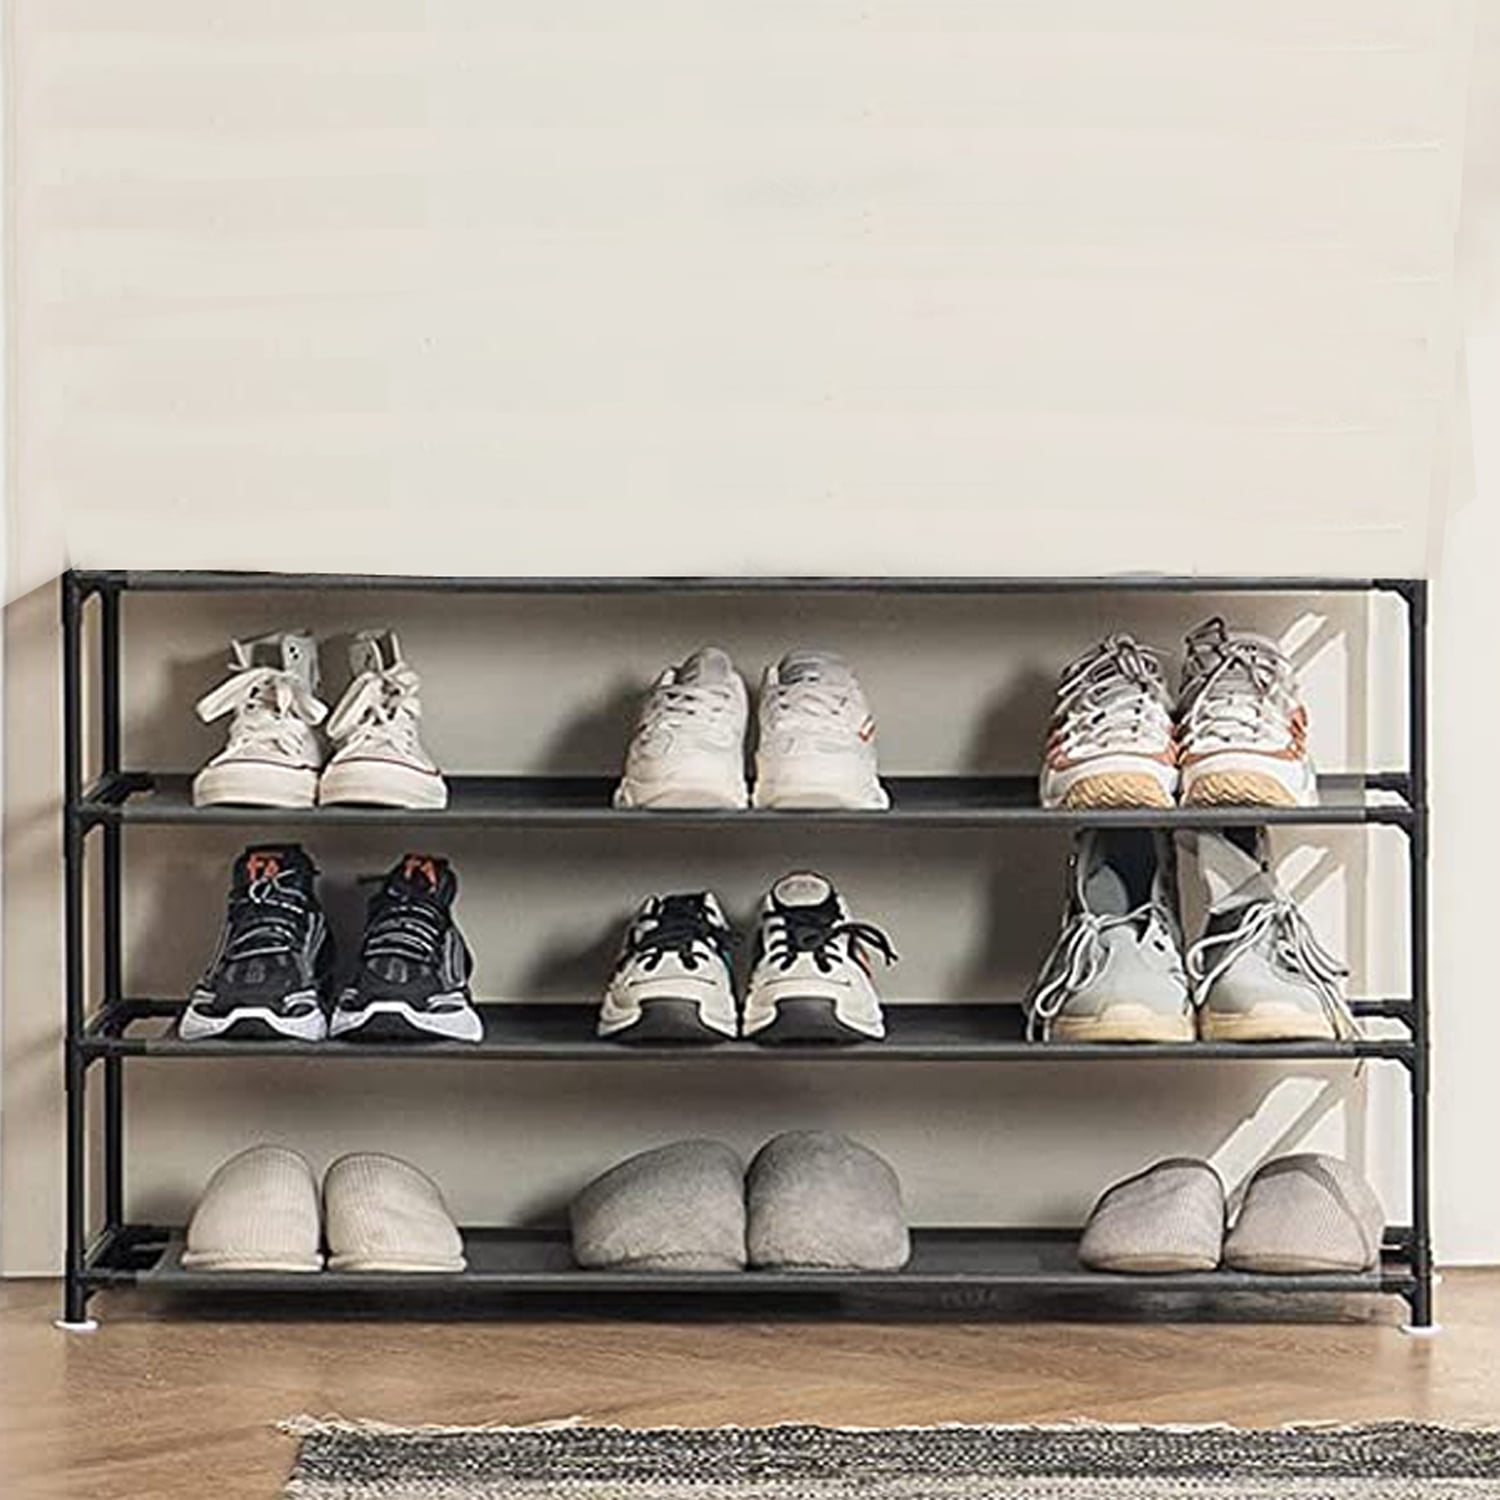 Goorabbit 20 Pairs Shoe Rack Organizer with 4 Tiers, for up to 20